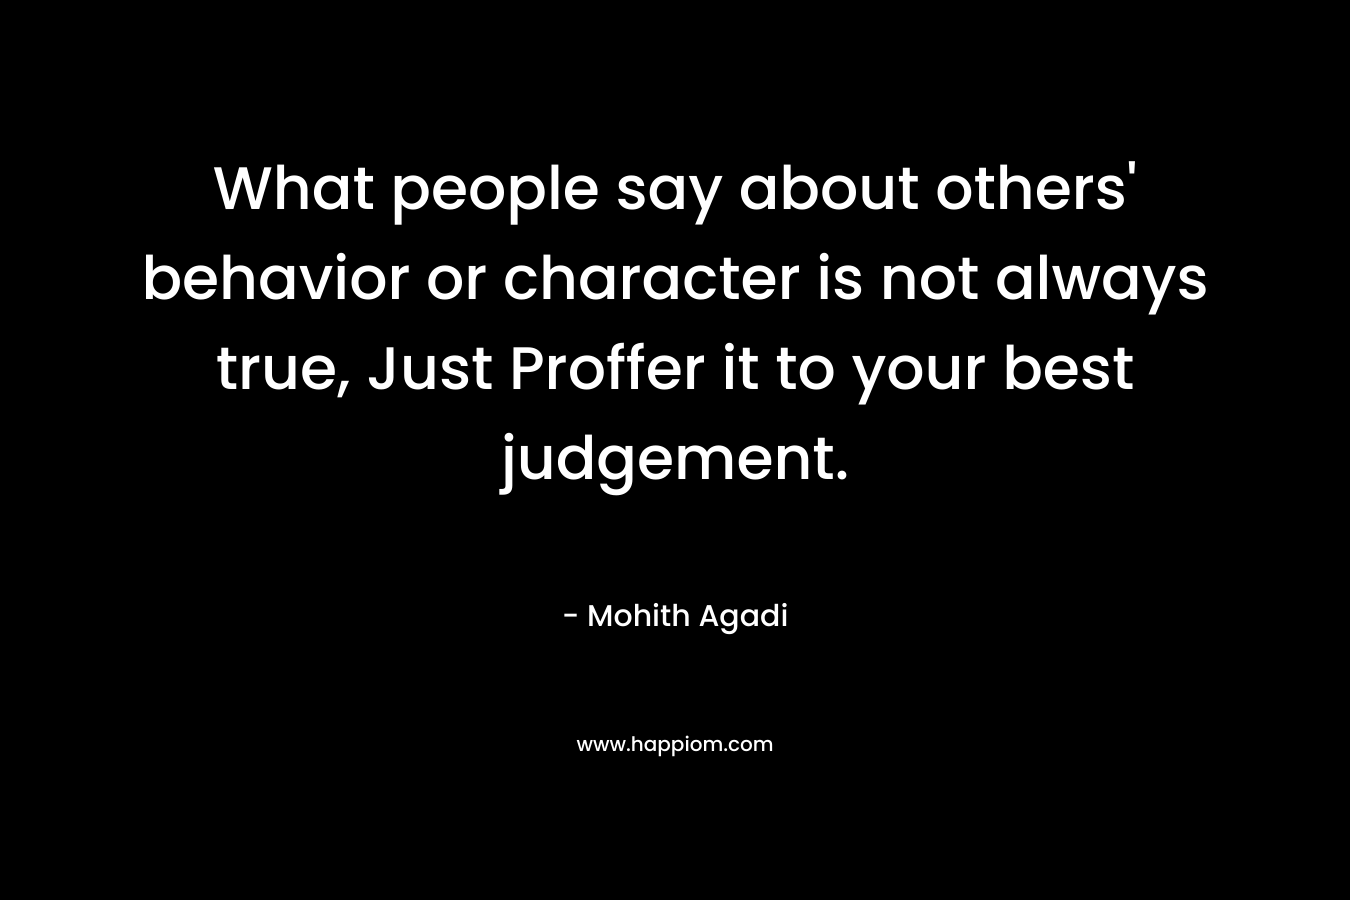 What people say about others' behavior or character is not always true, Just Proffer it to your best judgement.